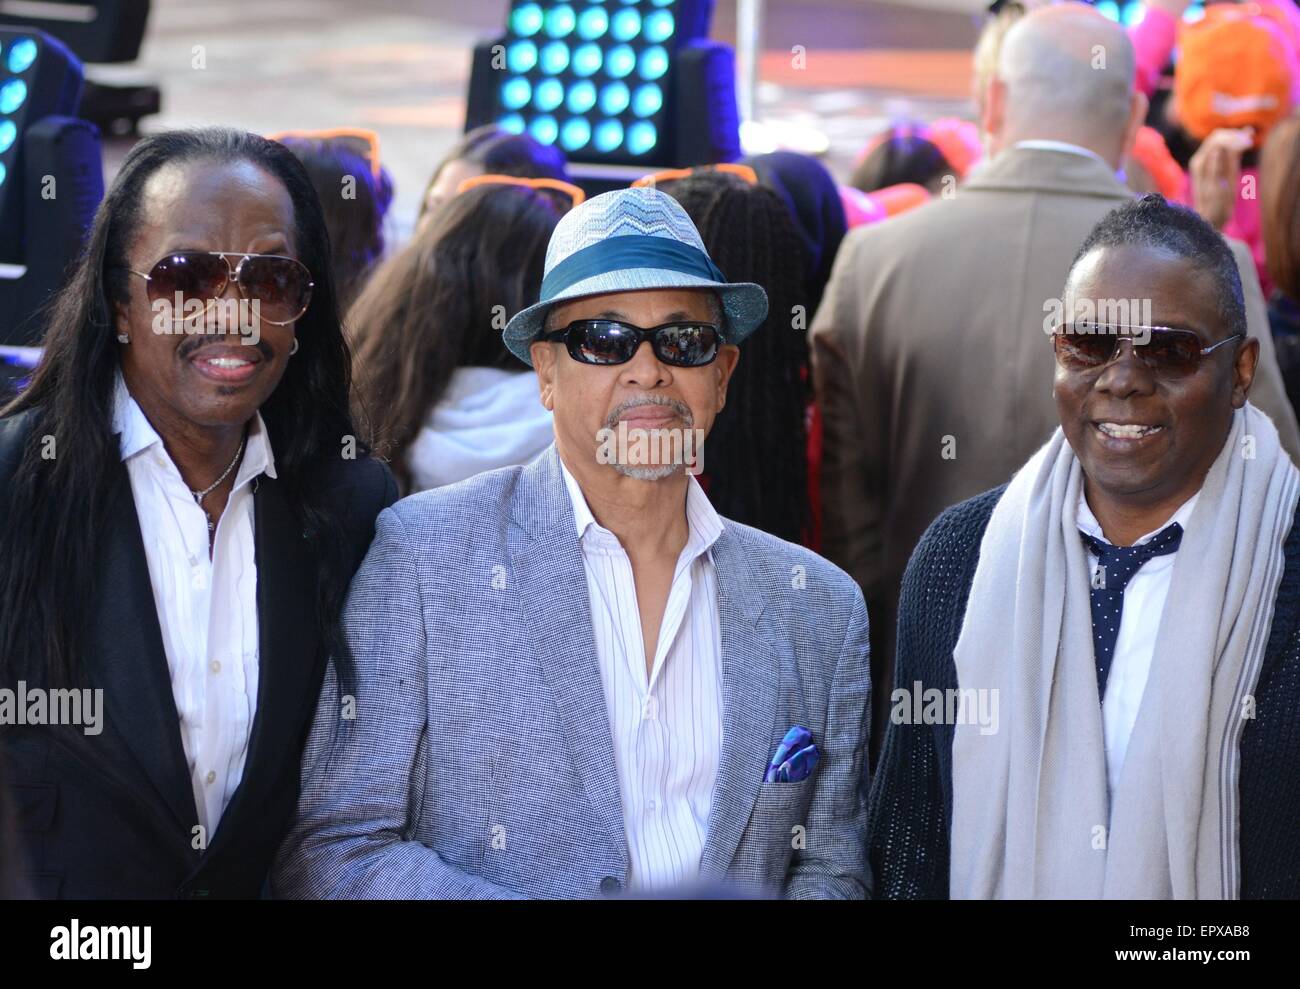 New York, NY, USA. 22nd May, 2015. Earth Wind & Fire: Verdine White, Ralph Johnson, Philip Bailey on stage for NBC Today Show Concert Series with Meghan Trainor, Rockefeller Plaza, New York, NY May 22, 2015. Credit:  Derek Storm/Everett Collection/Alamy Live News Stock Photo